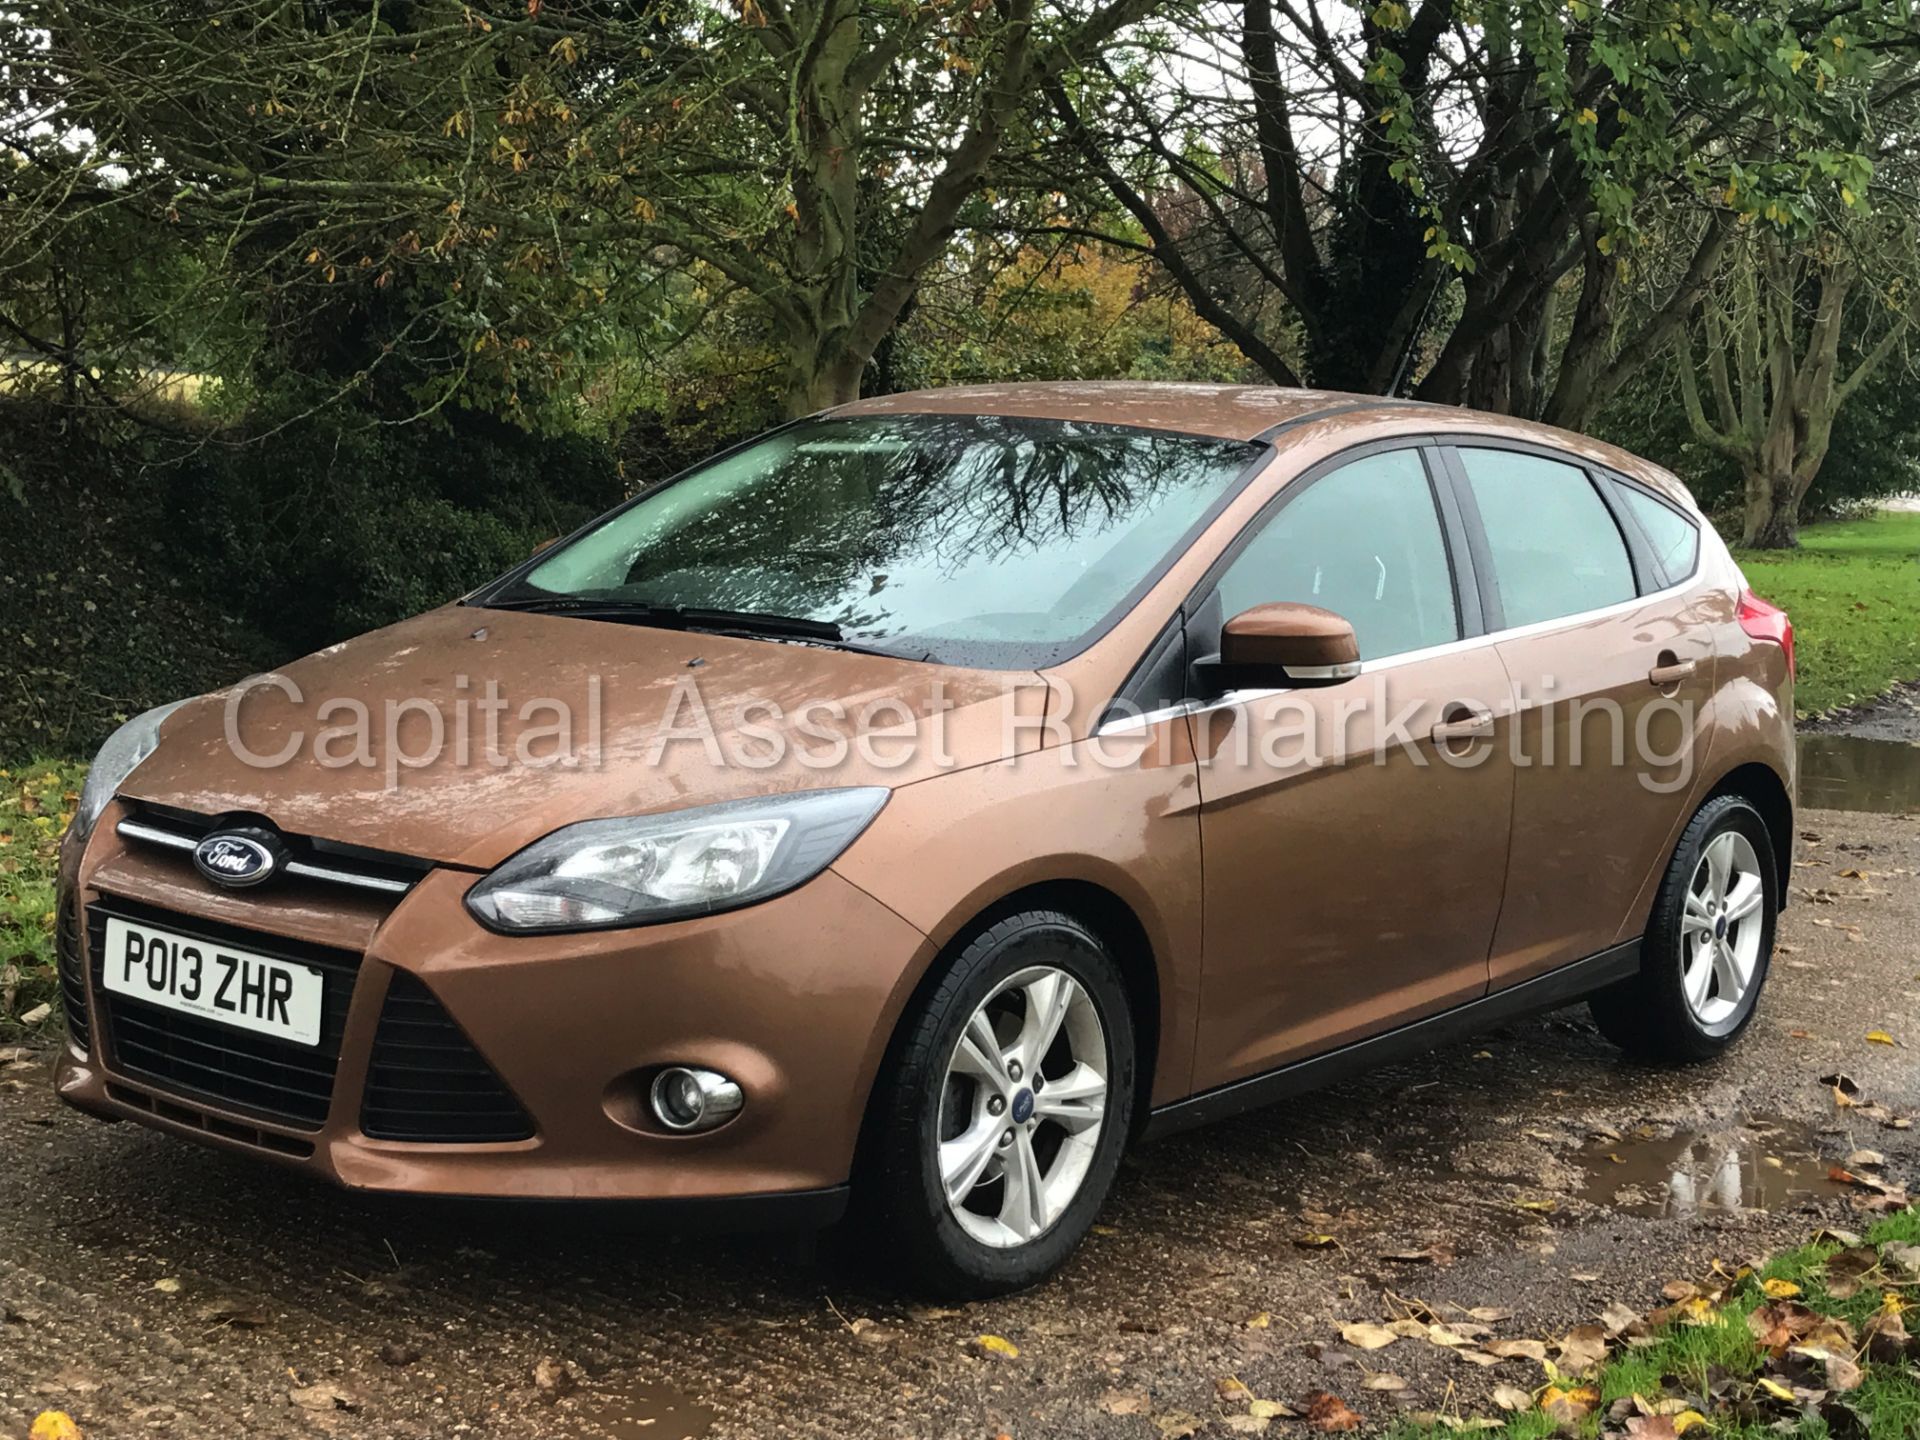 (On Sale) FORD FOCUS 'ZETEC' (2013 - 13 REG) '1.6 TDCI - 6 SPEED - STOP / START - AIR CON - 65 MPG+ - Image 2 of 24